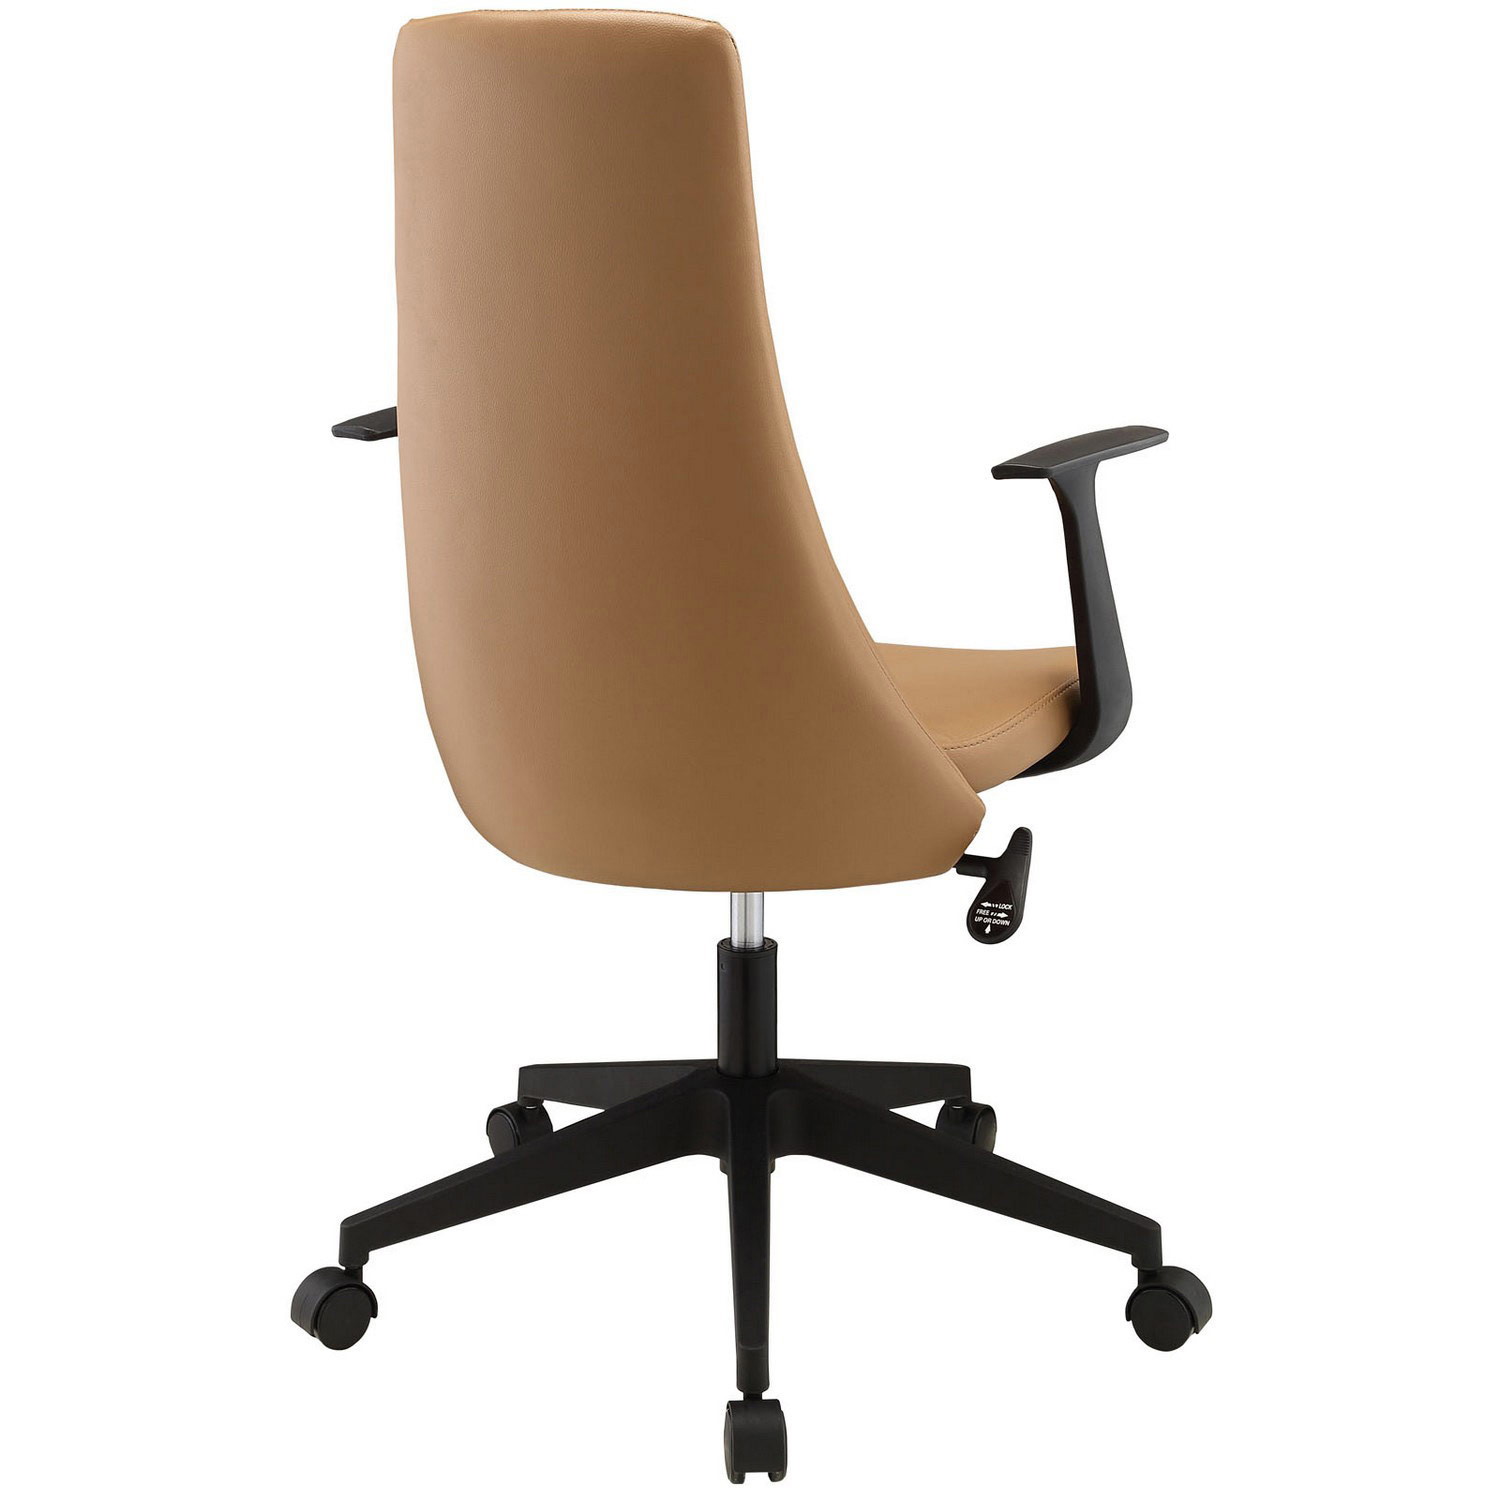 Modway Fount Mid Back Office Chair - Tan